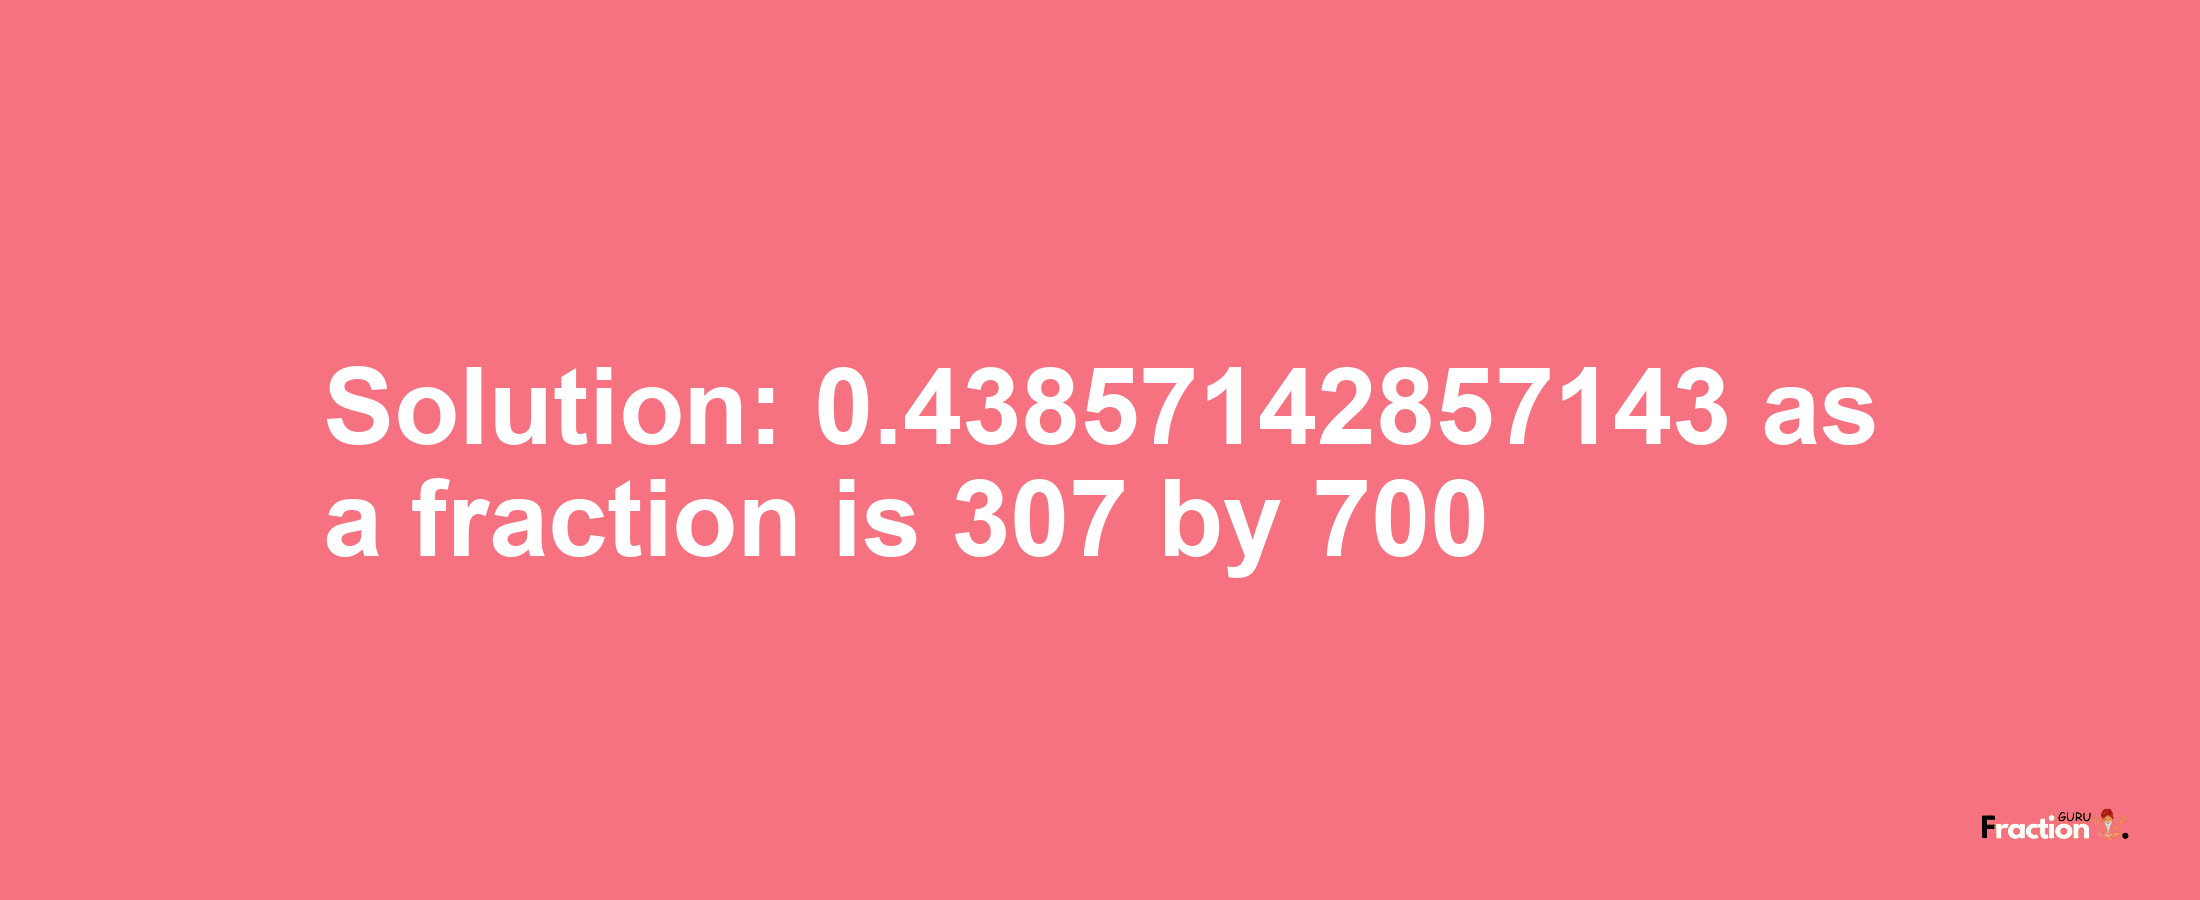 Solution:0.43857142857143 as a fraction is 307/700